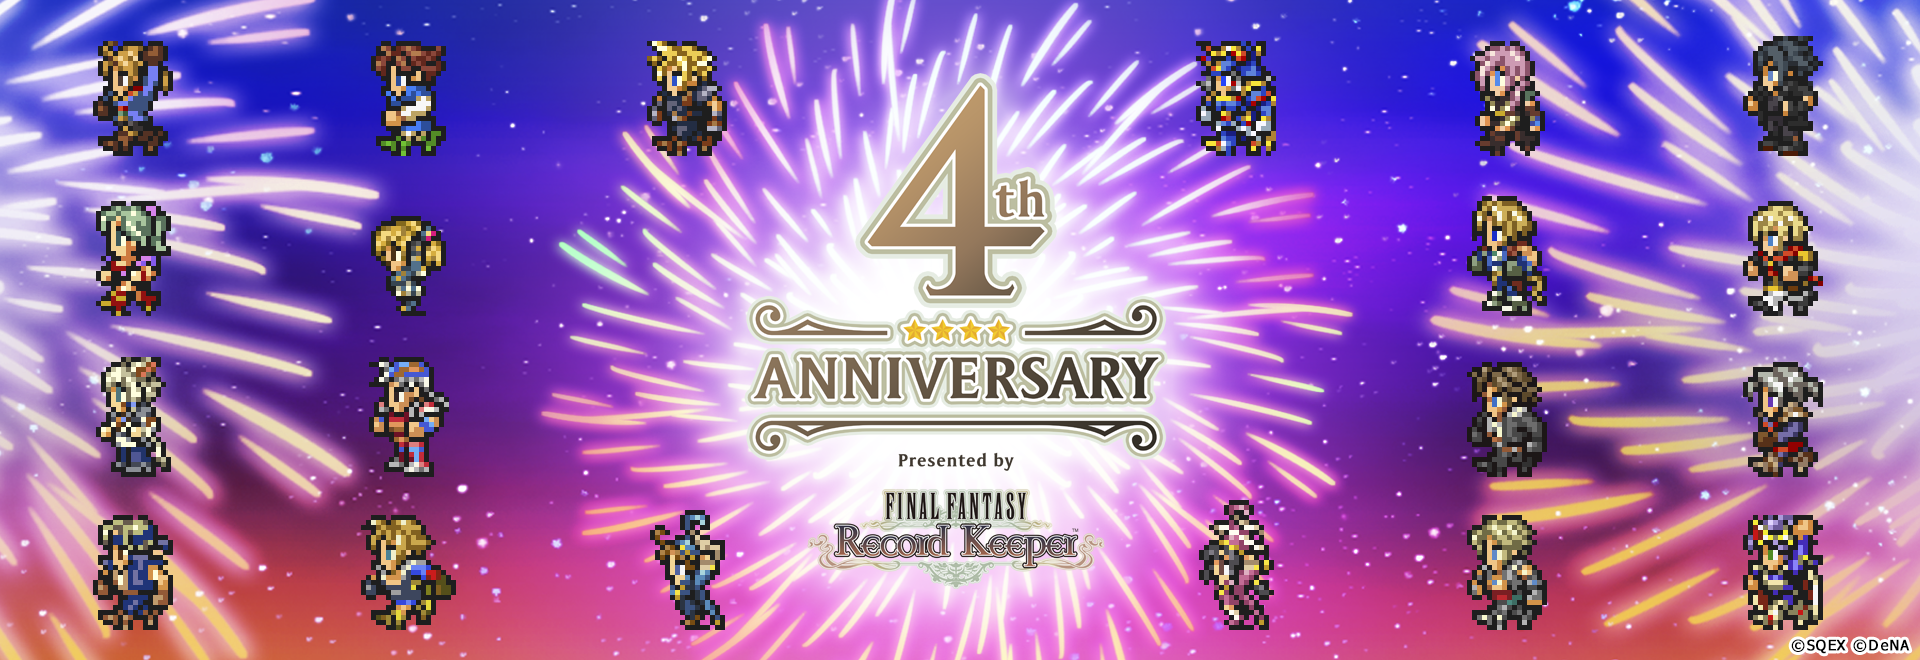 FINAL FANTASY Record Keeper's 4th Anniversary Event now underway